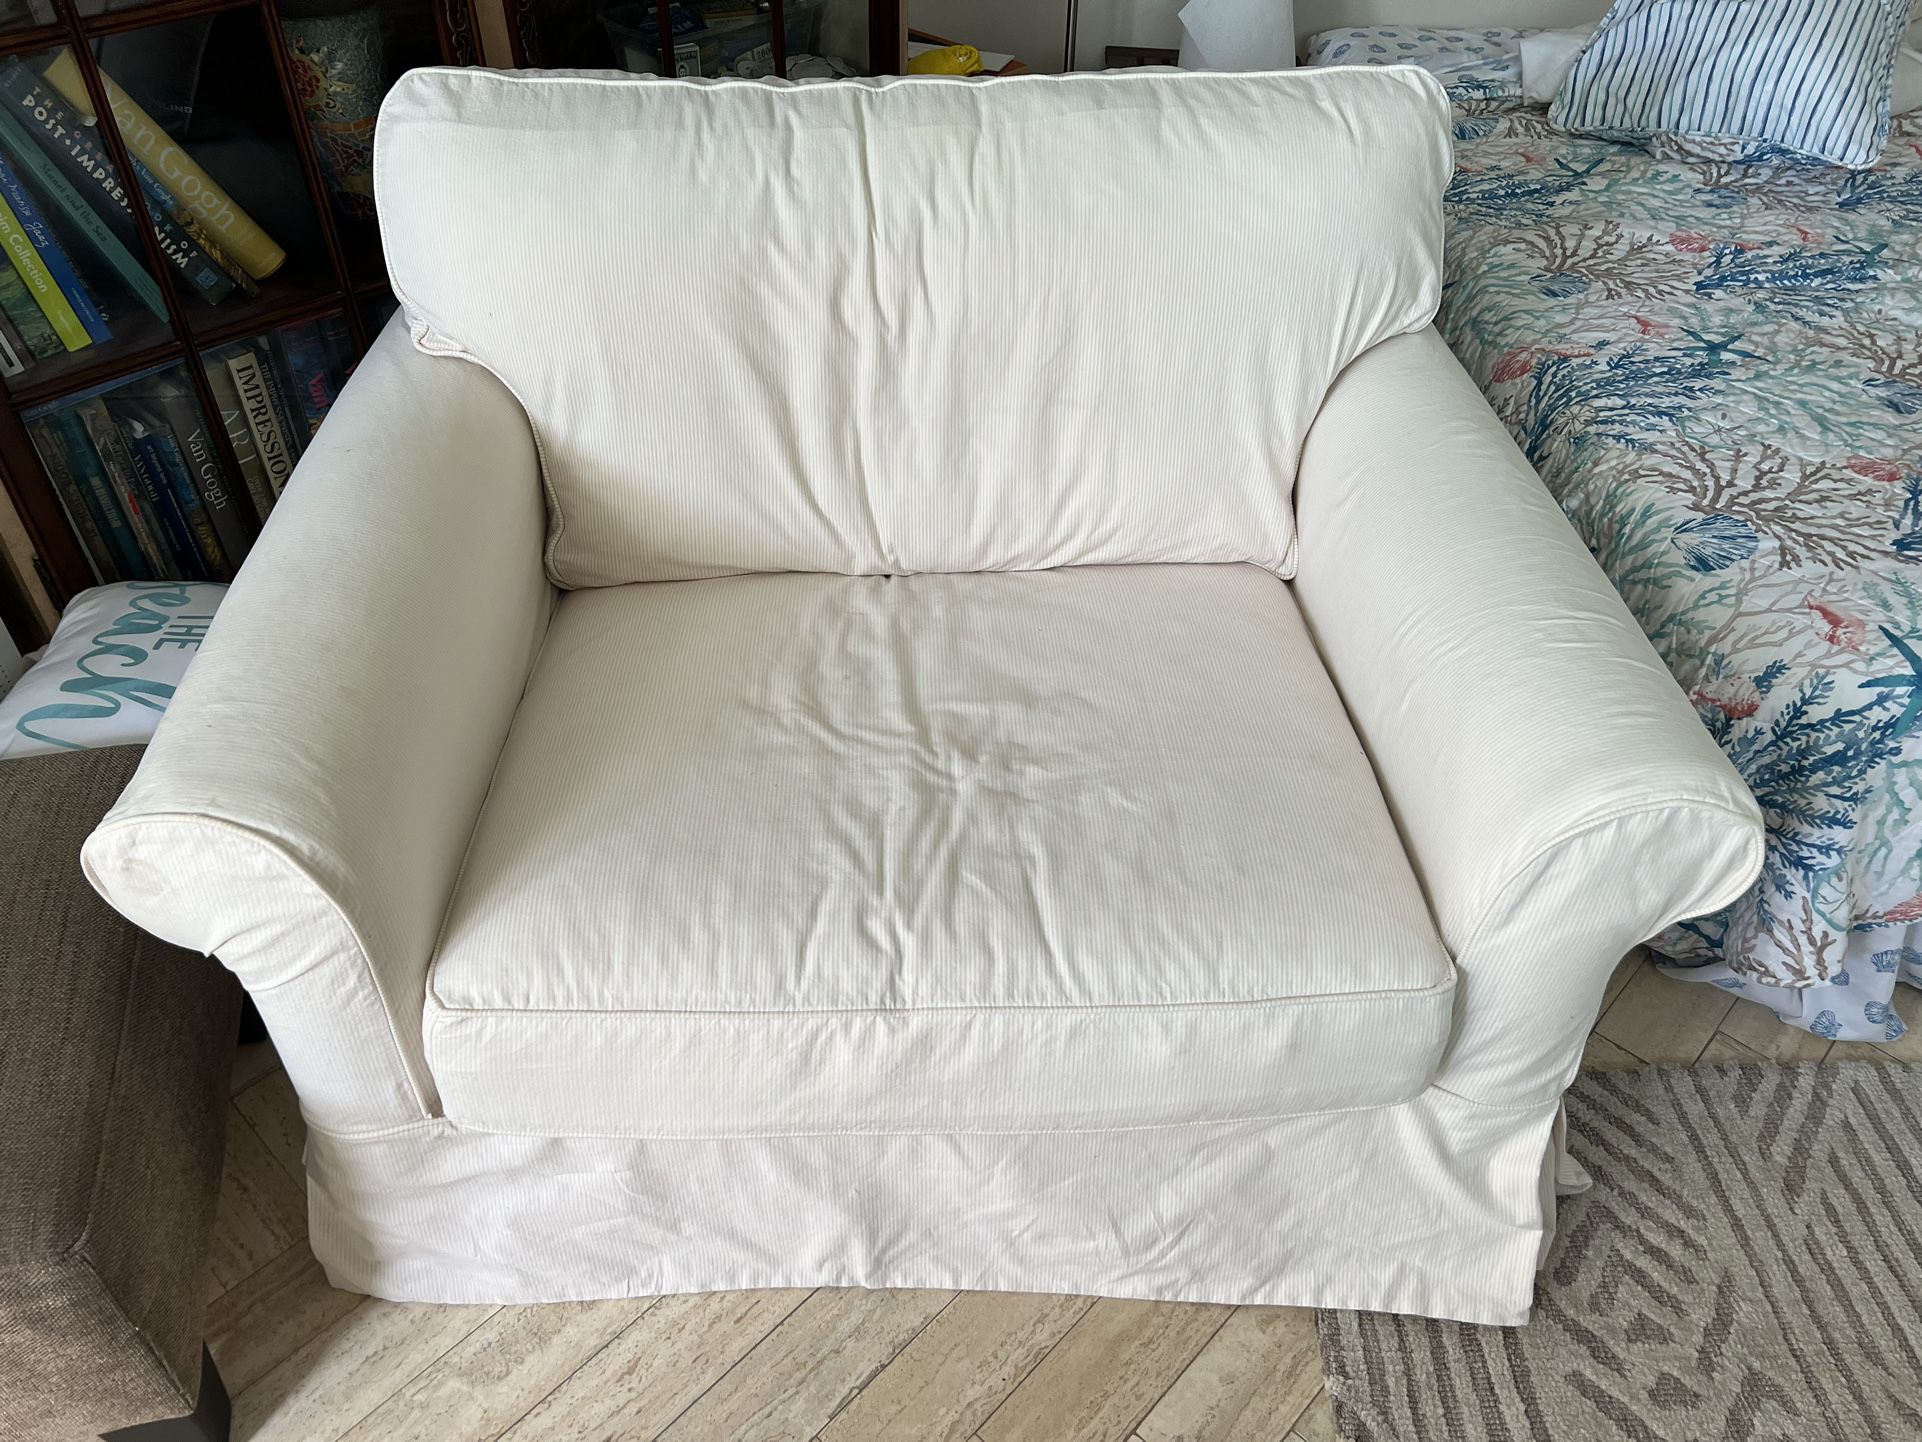 Free To Good Home- Big Chair!